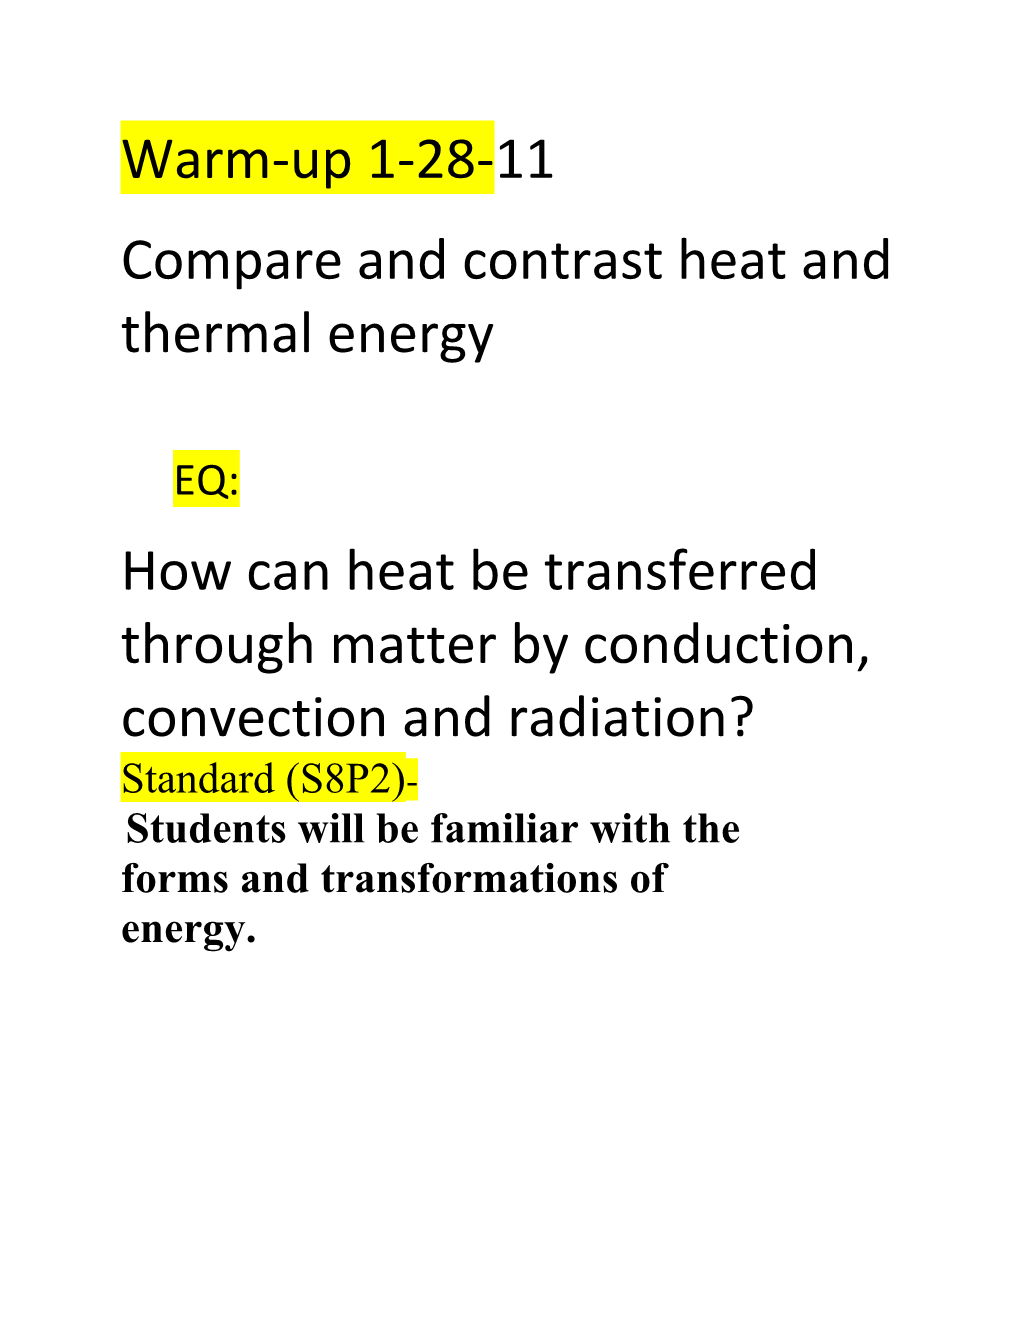 Compare and Contrast Heat and Thermal Energy